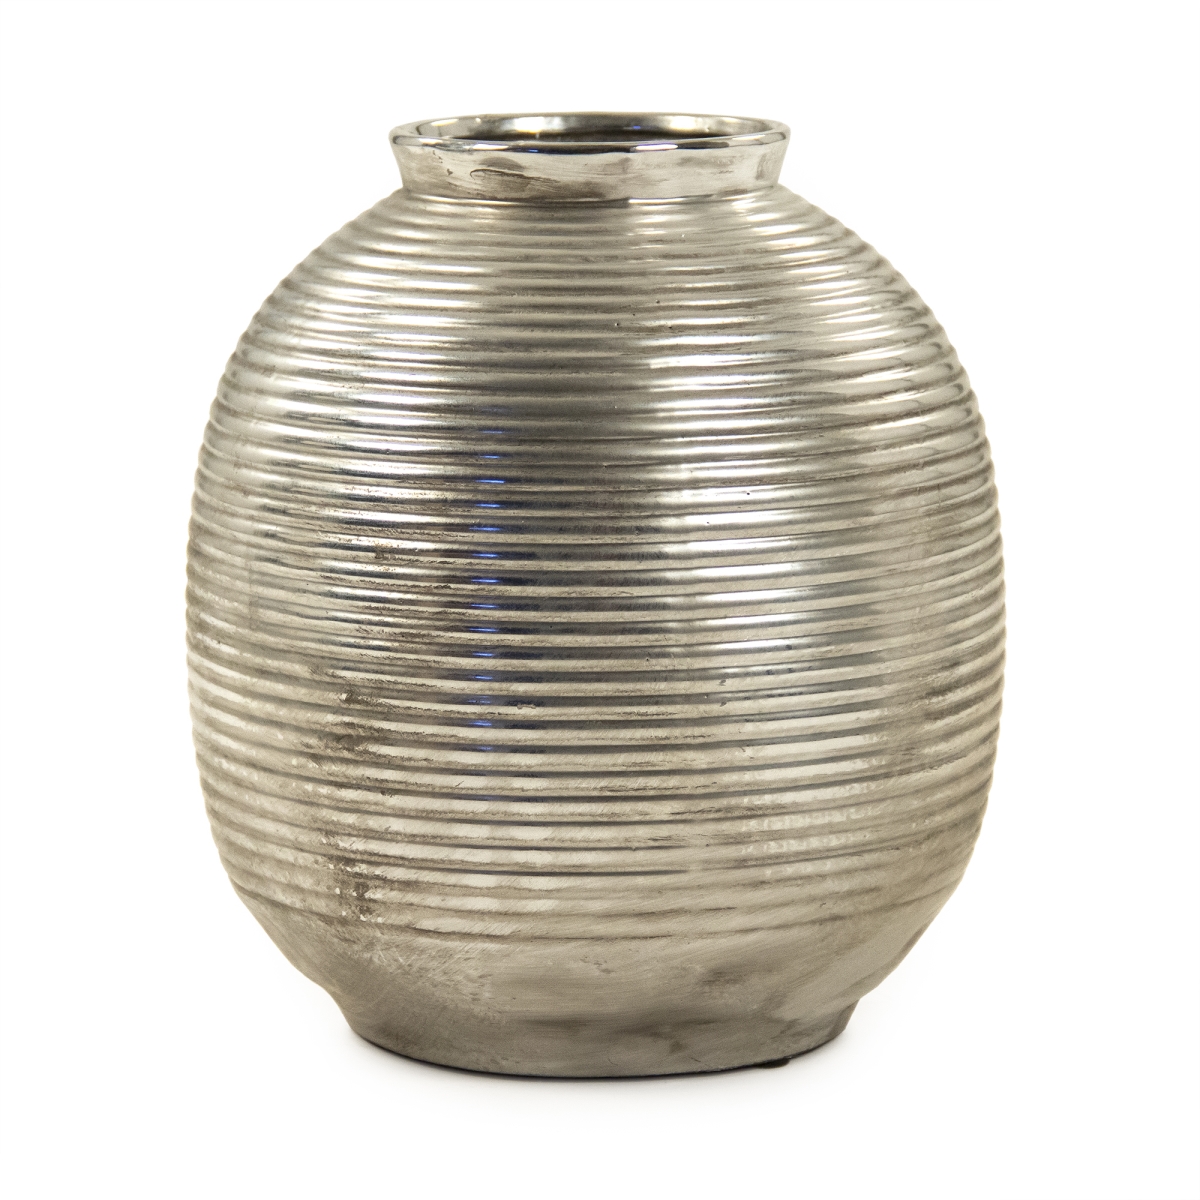 10078s A840 Distressed Metallic Spherical Vase, Small